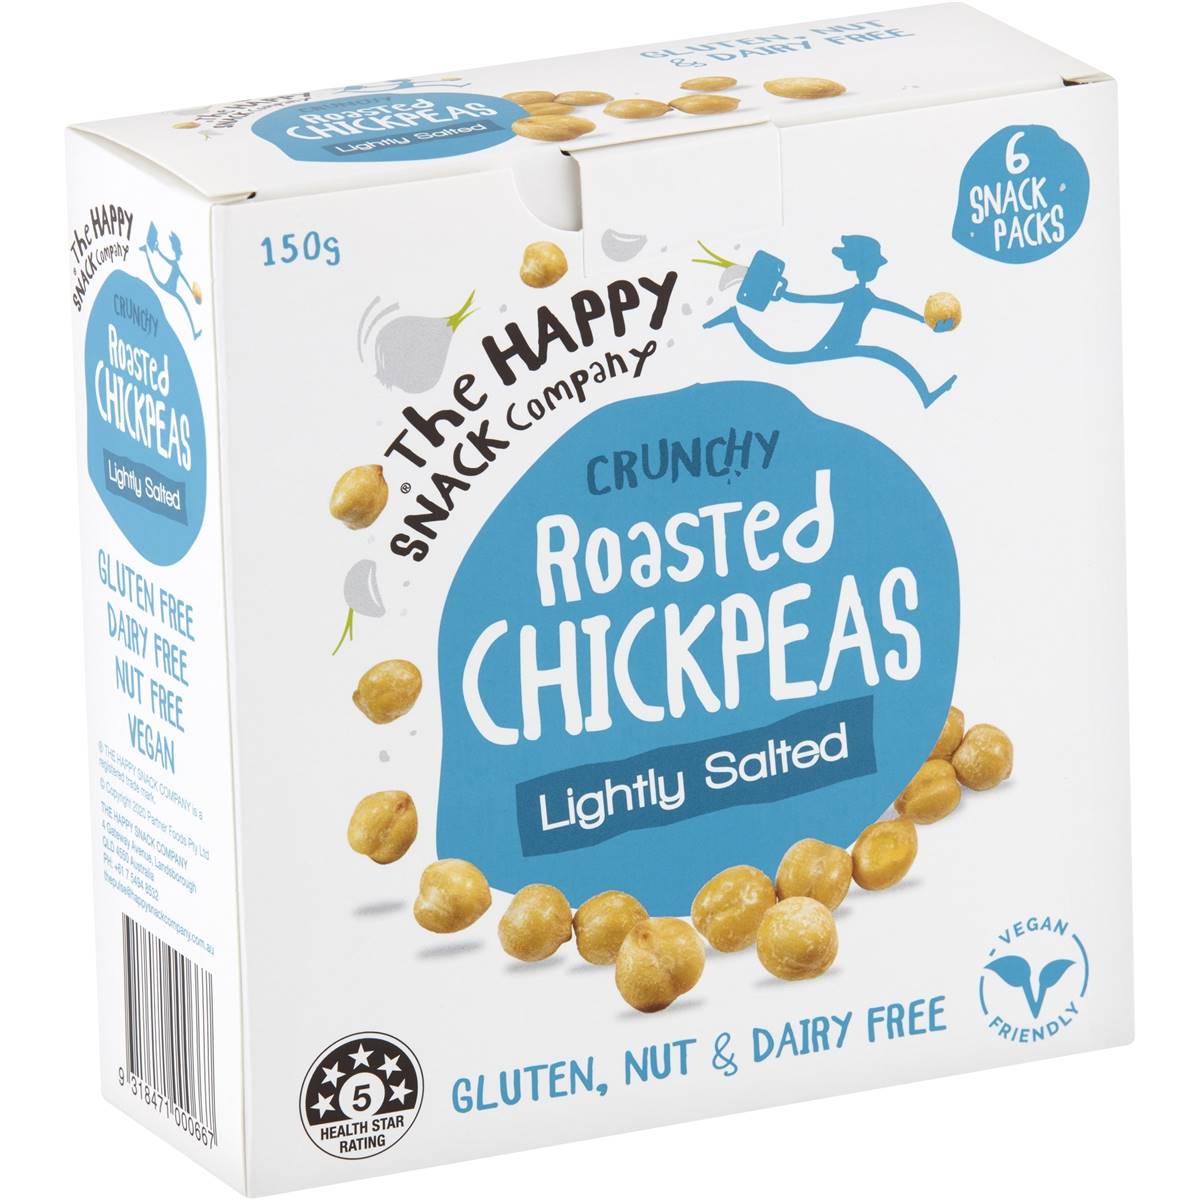 The Happy Snack Company Roasted Chickpeas Lightly Salted 6 Pack now $4.80(was $6, Save $1.20)